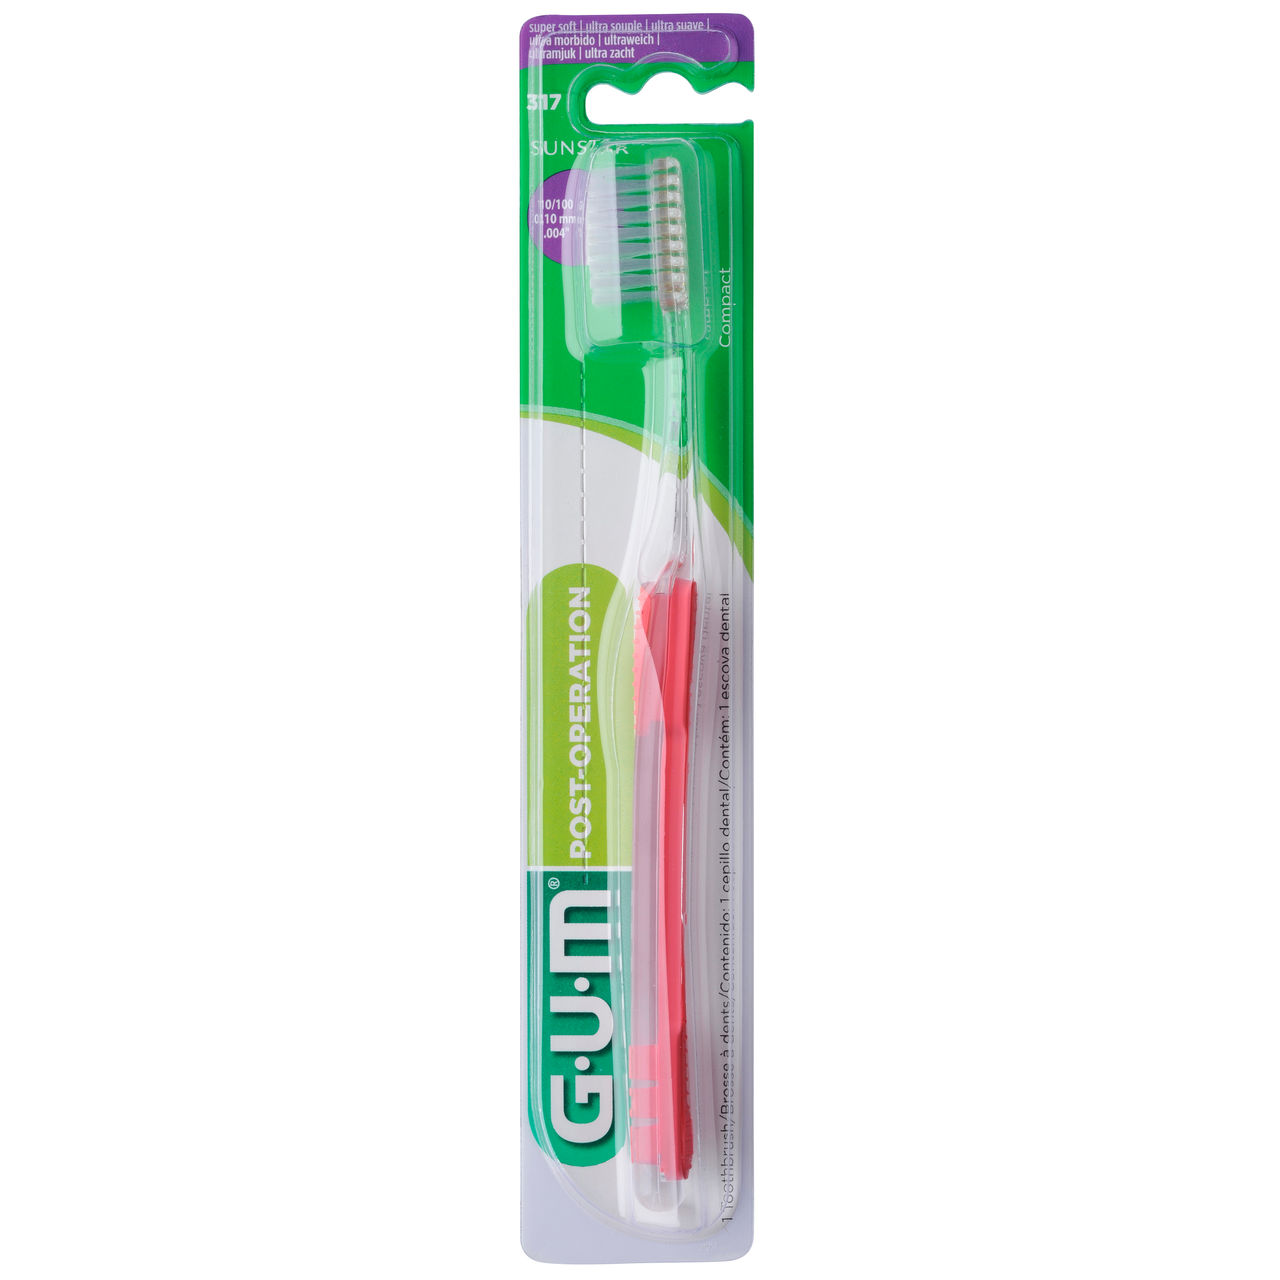 GUM® Delicate Post Surgical Toothbrush